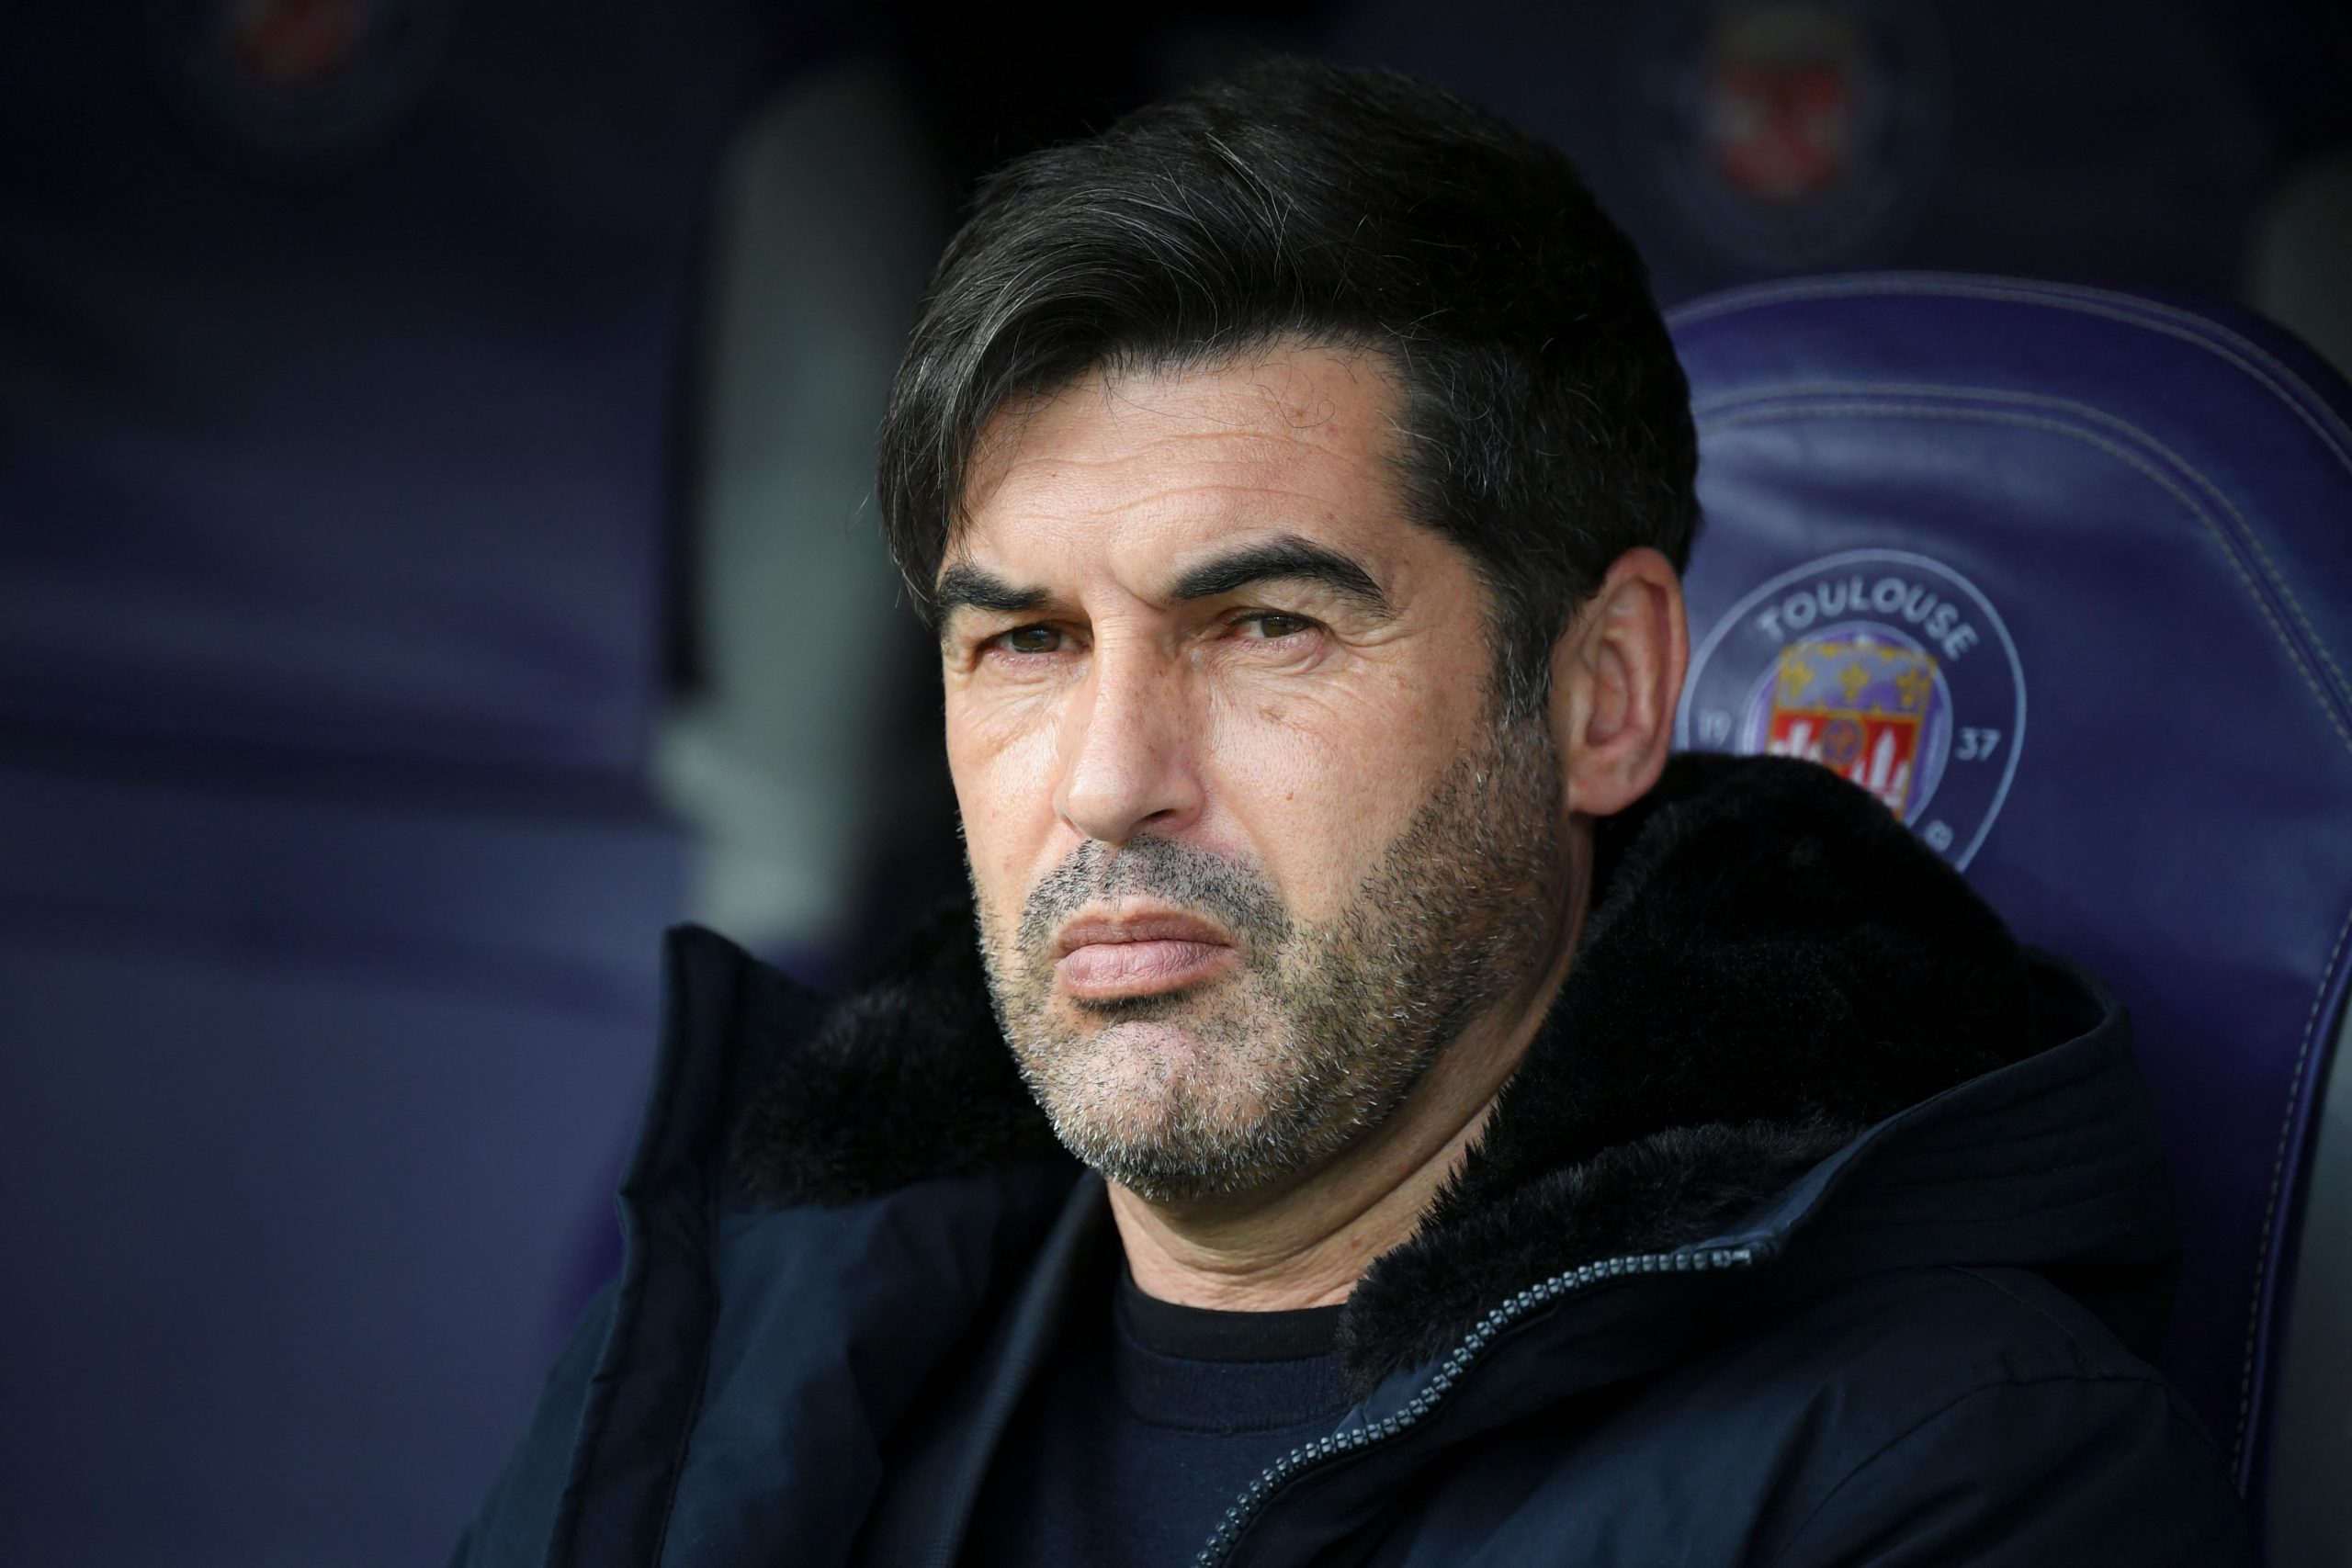 West Ham United 'strongly consider' Tottenham Hotspur managerial target Paulo Fonseca.